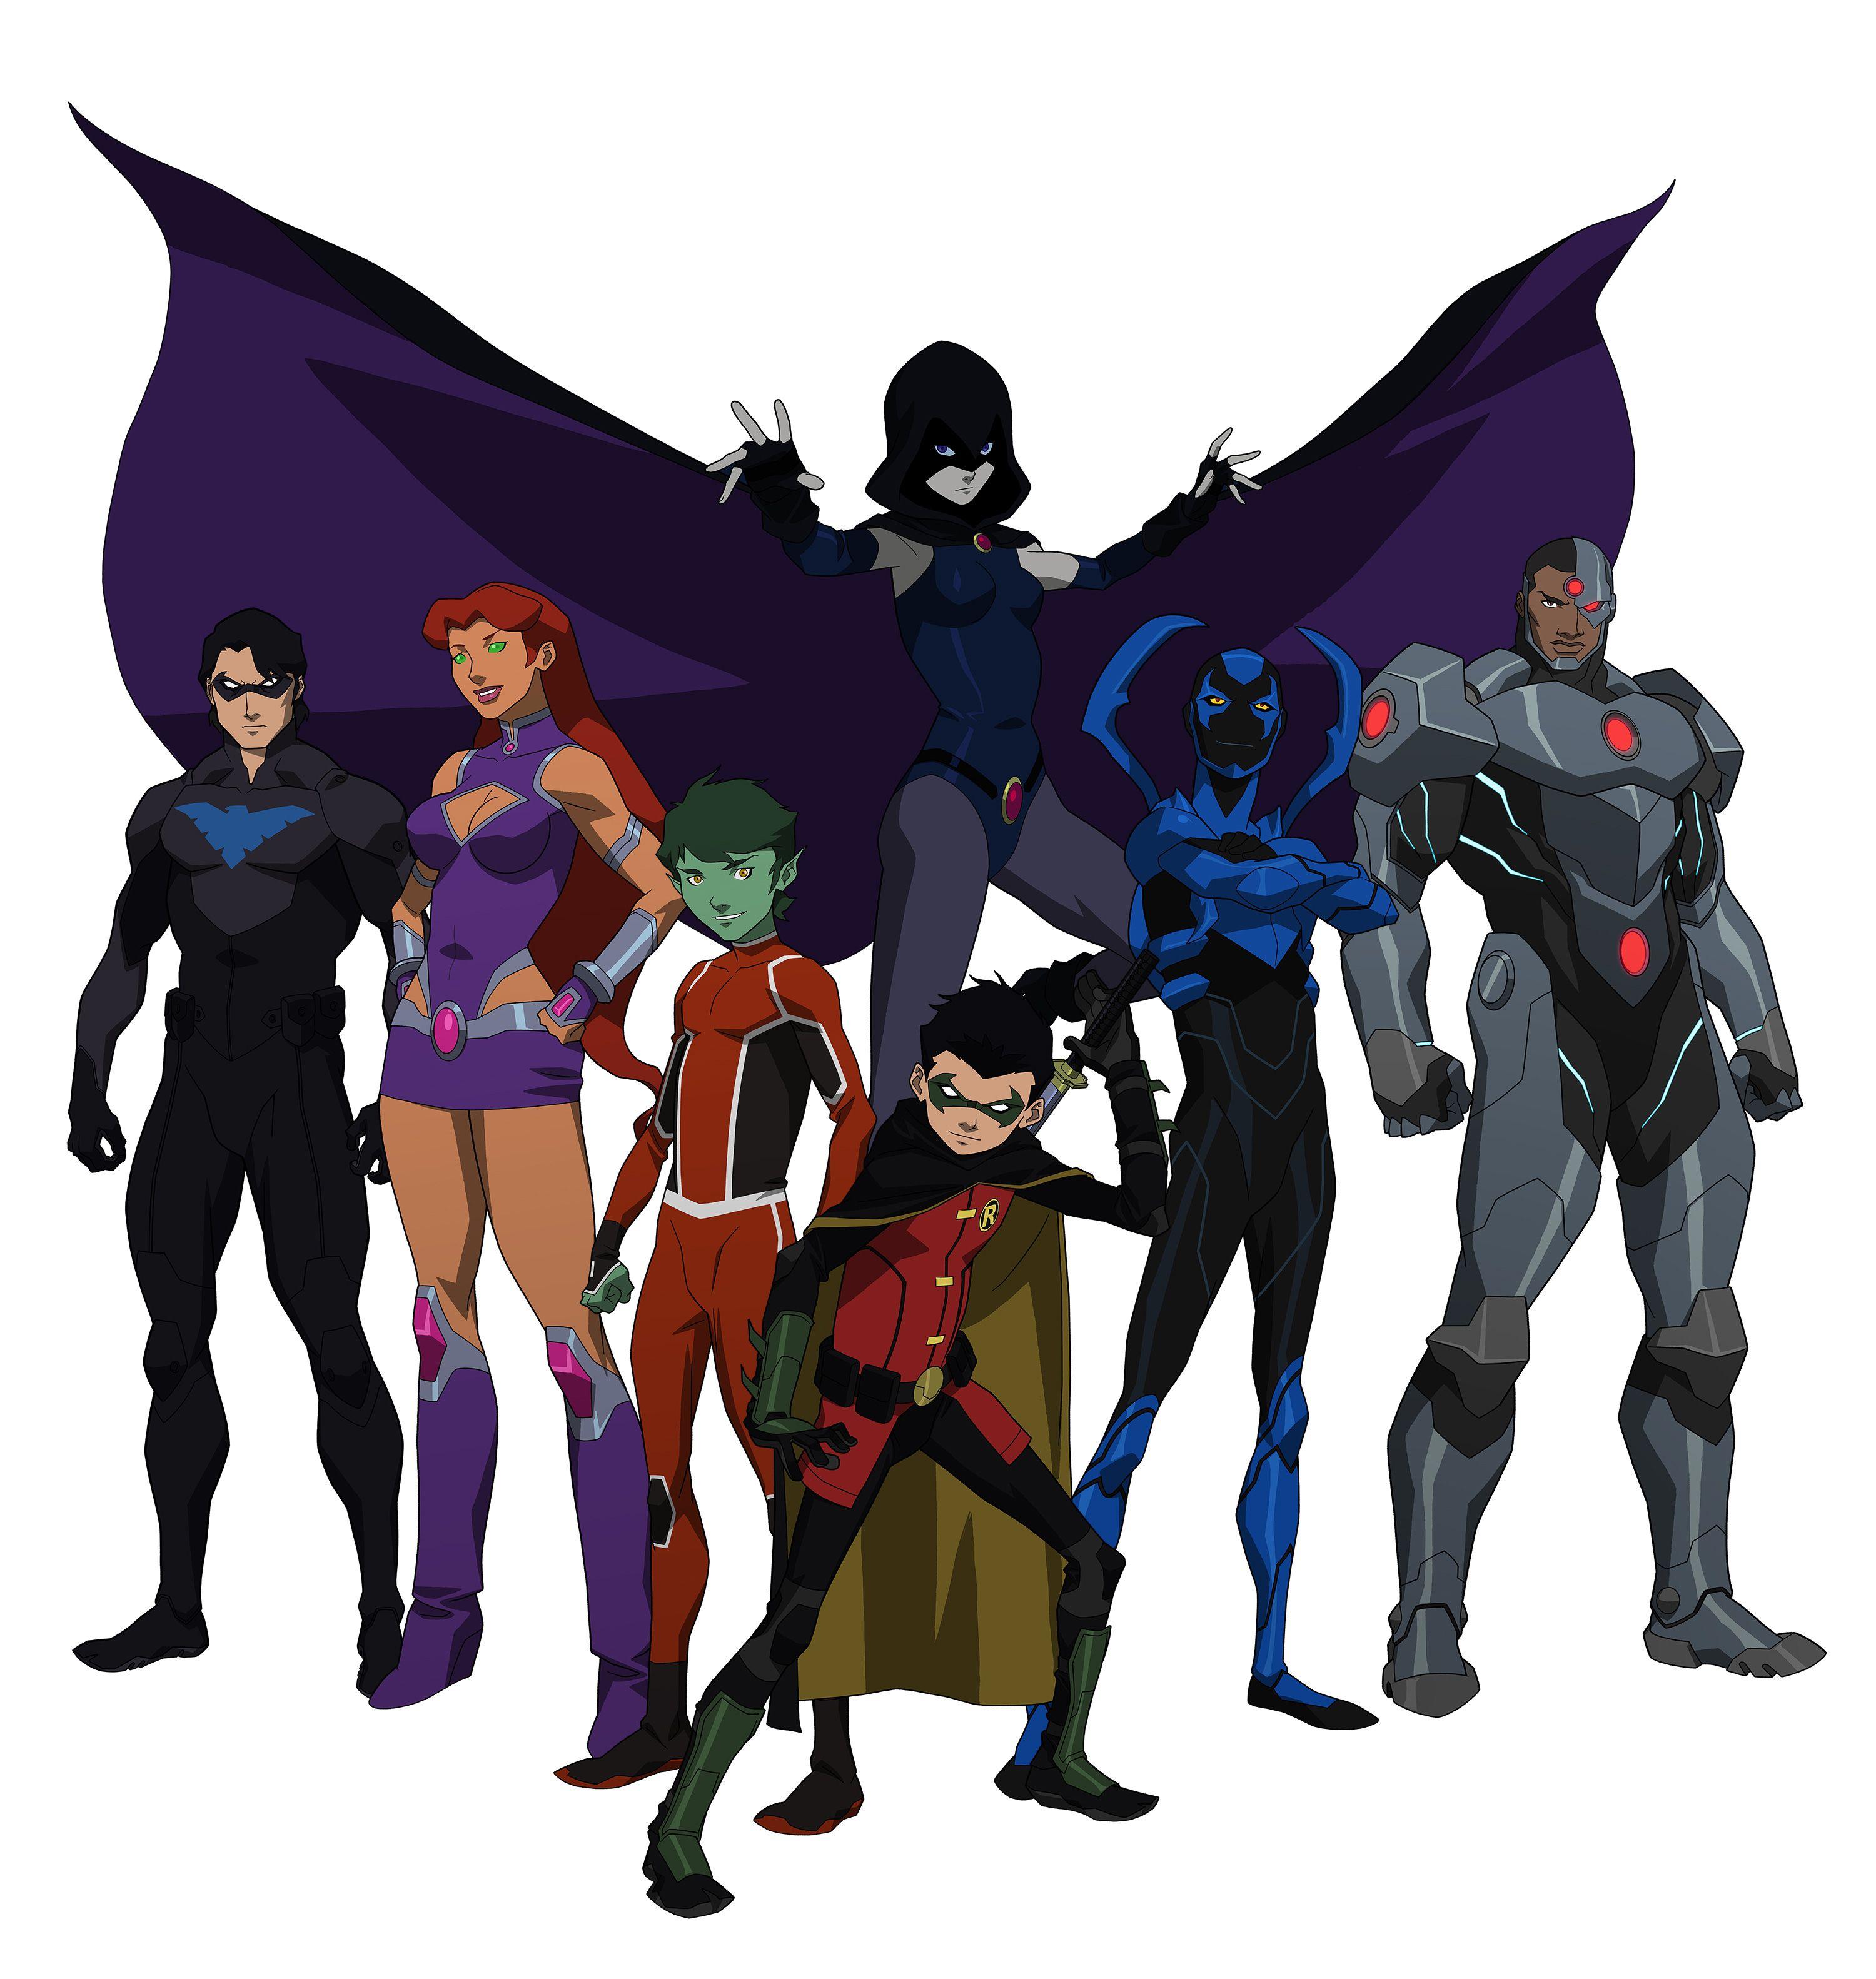 Roll Call: Meet the Cast of Justice League vs. Teen Titans